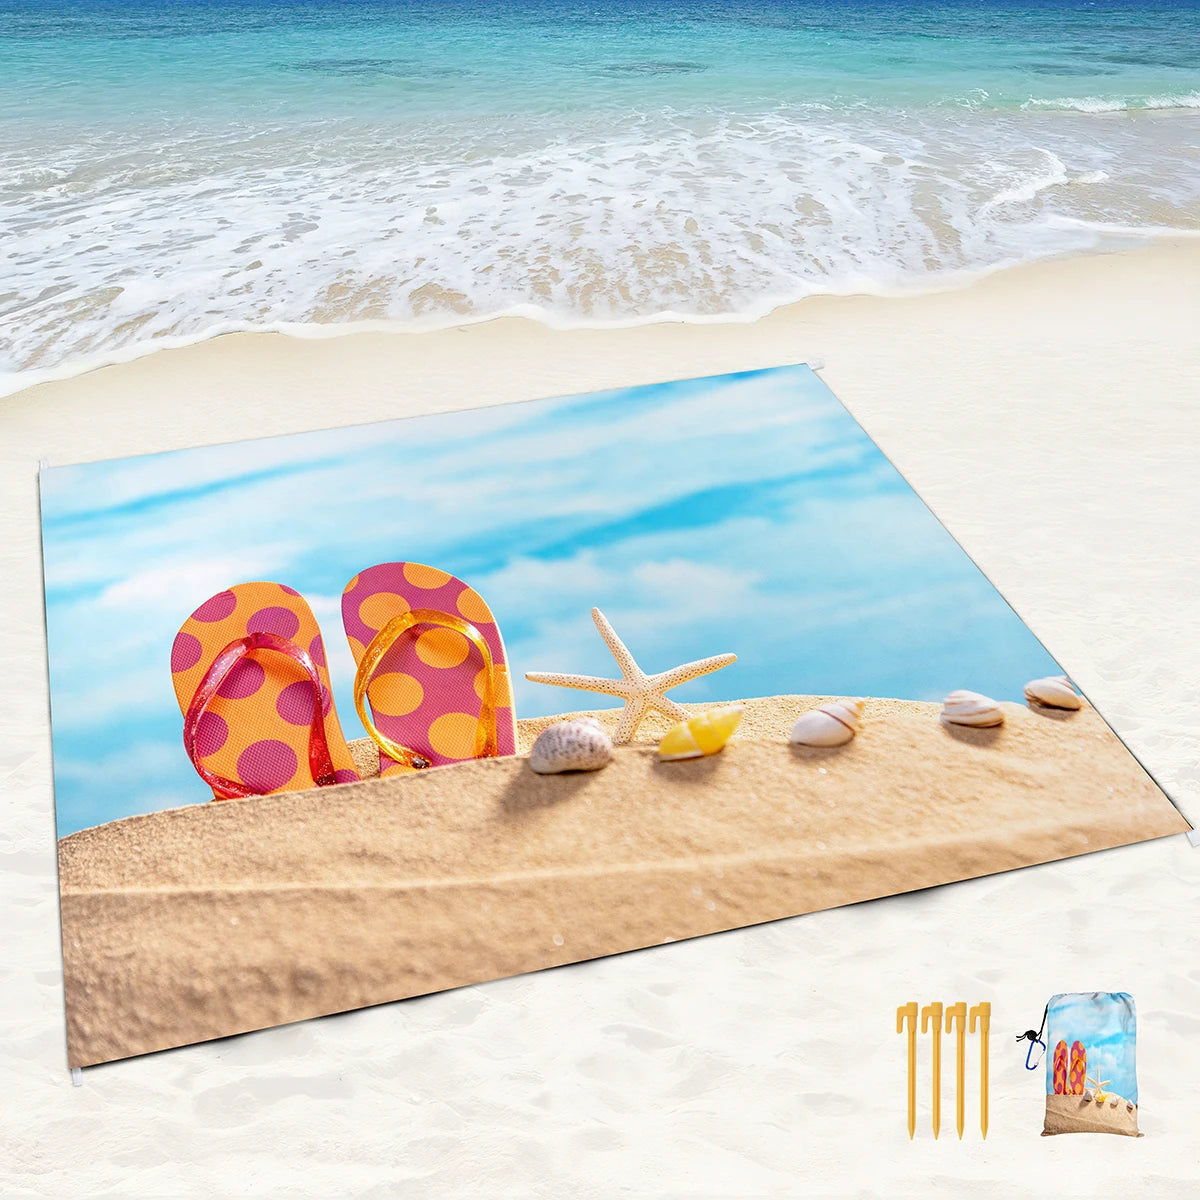 Beach Mat,  Lightweight,  Durable,  Portable,  Outdoor Blanket with carrying pouch, 4 Stakes and 4 Corner Loops - Various Styles and Sizes (S, M, & L)